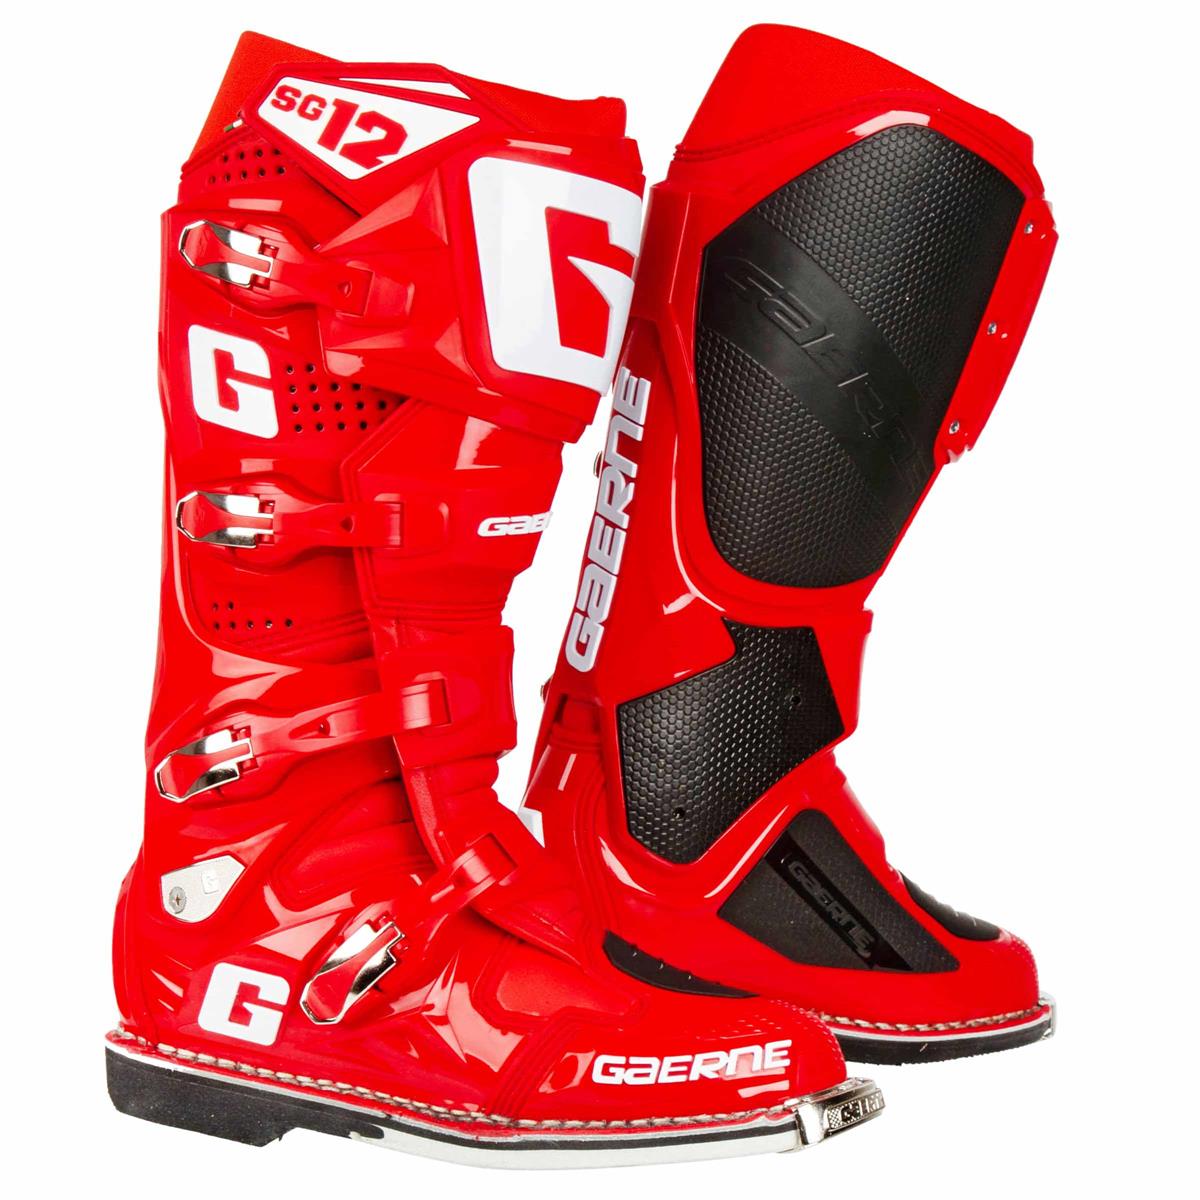 Gaerne MX Boots SG 12 Solid Red